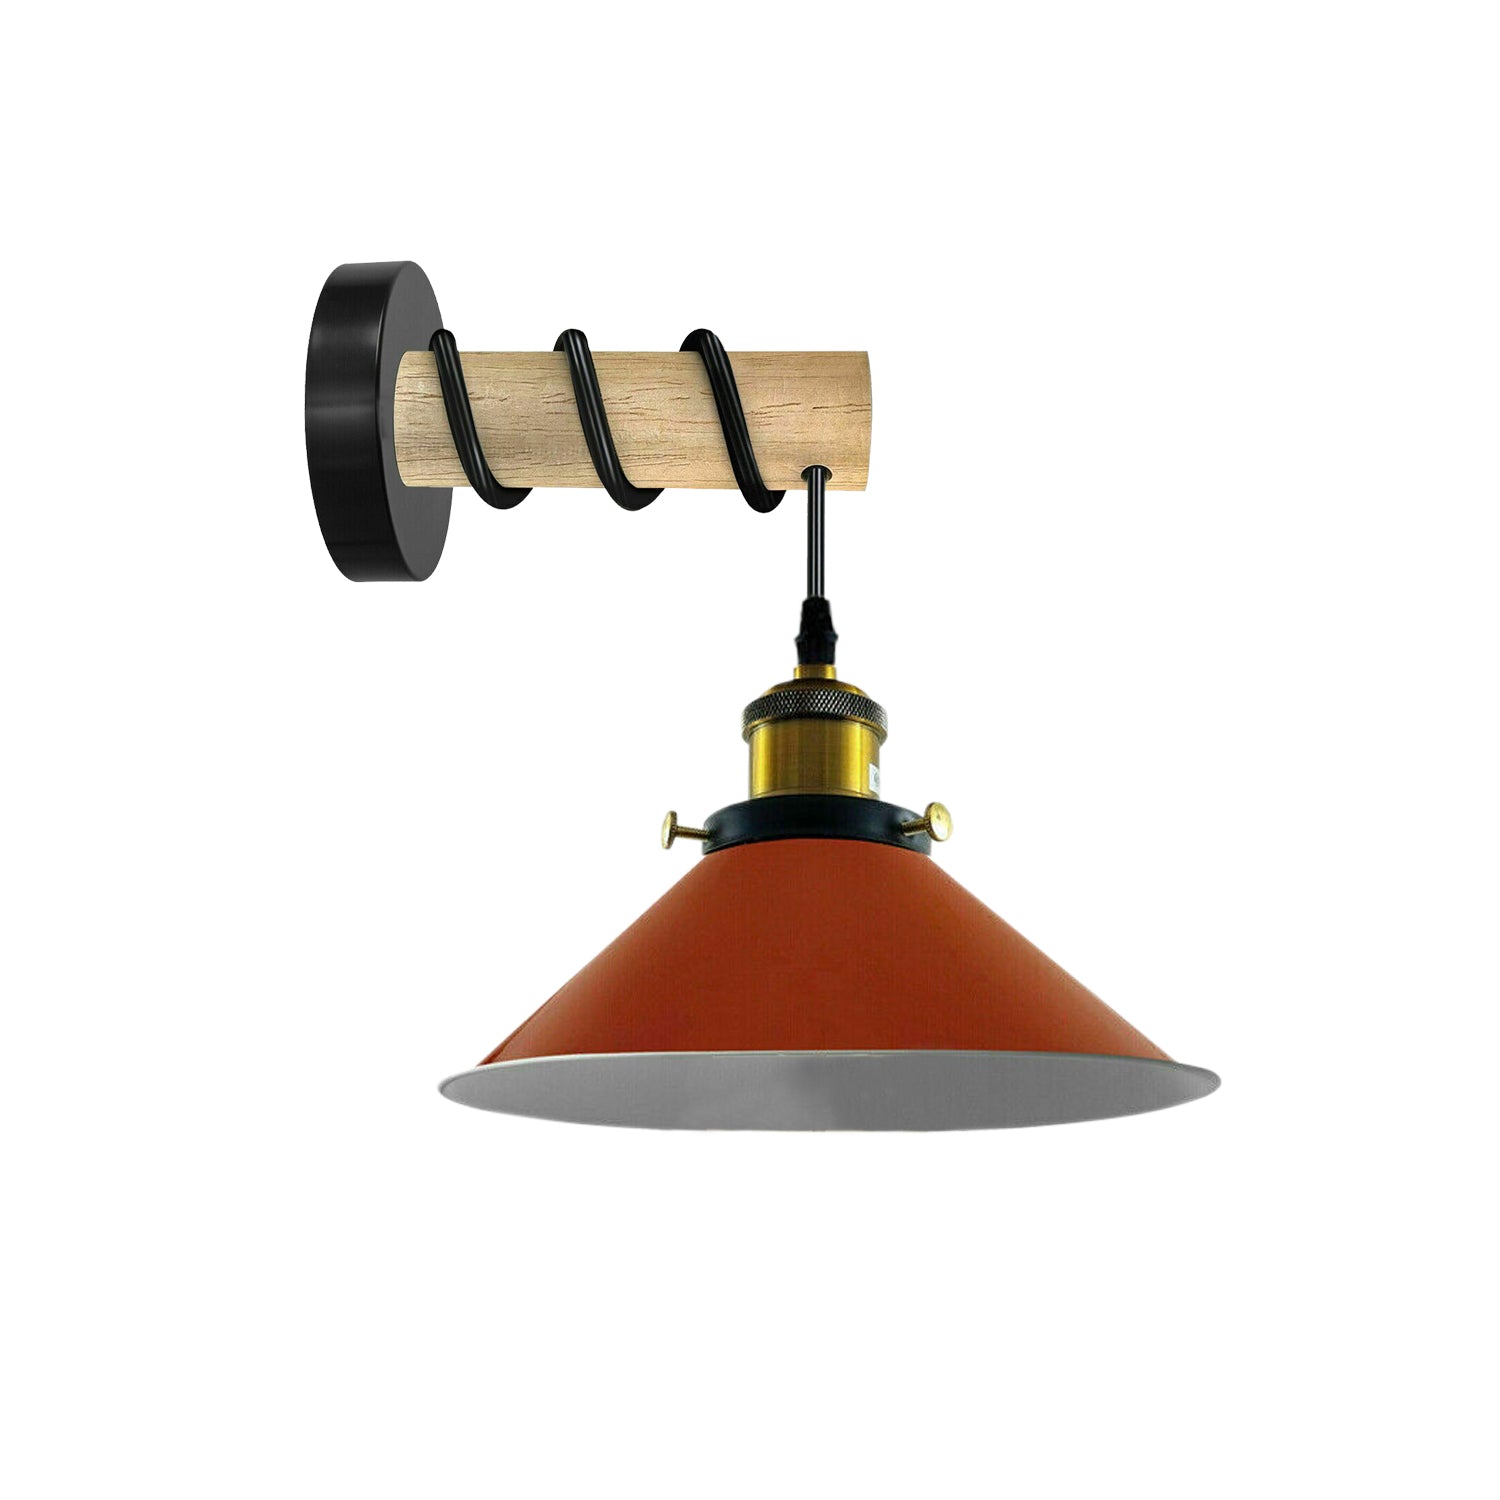 Modern Combined Solid Wooden Arm Chandelier Lighting With Orange Cone Shaped Metal Shade wall sconce~3474 - LEDSone UK Ltd